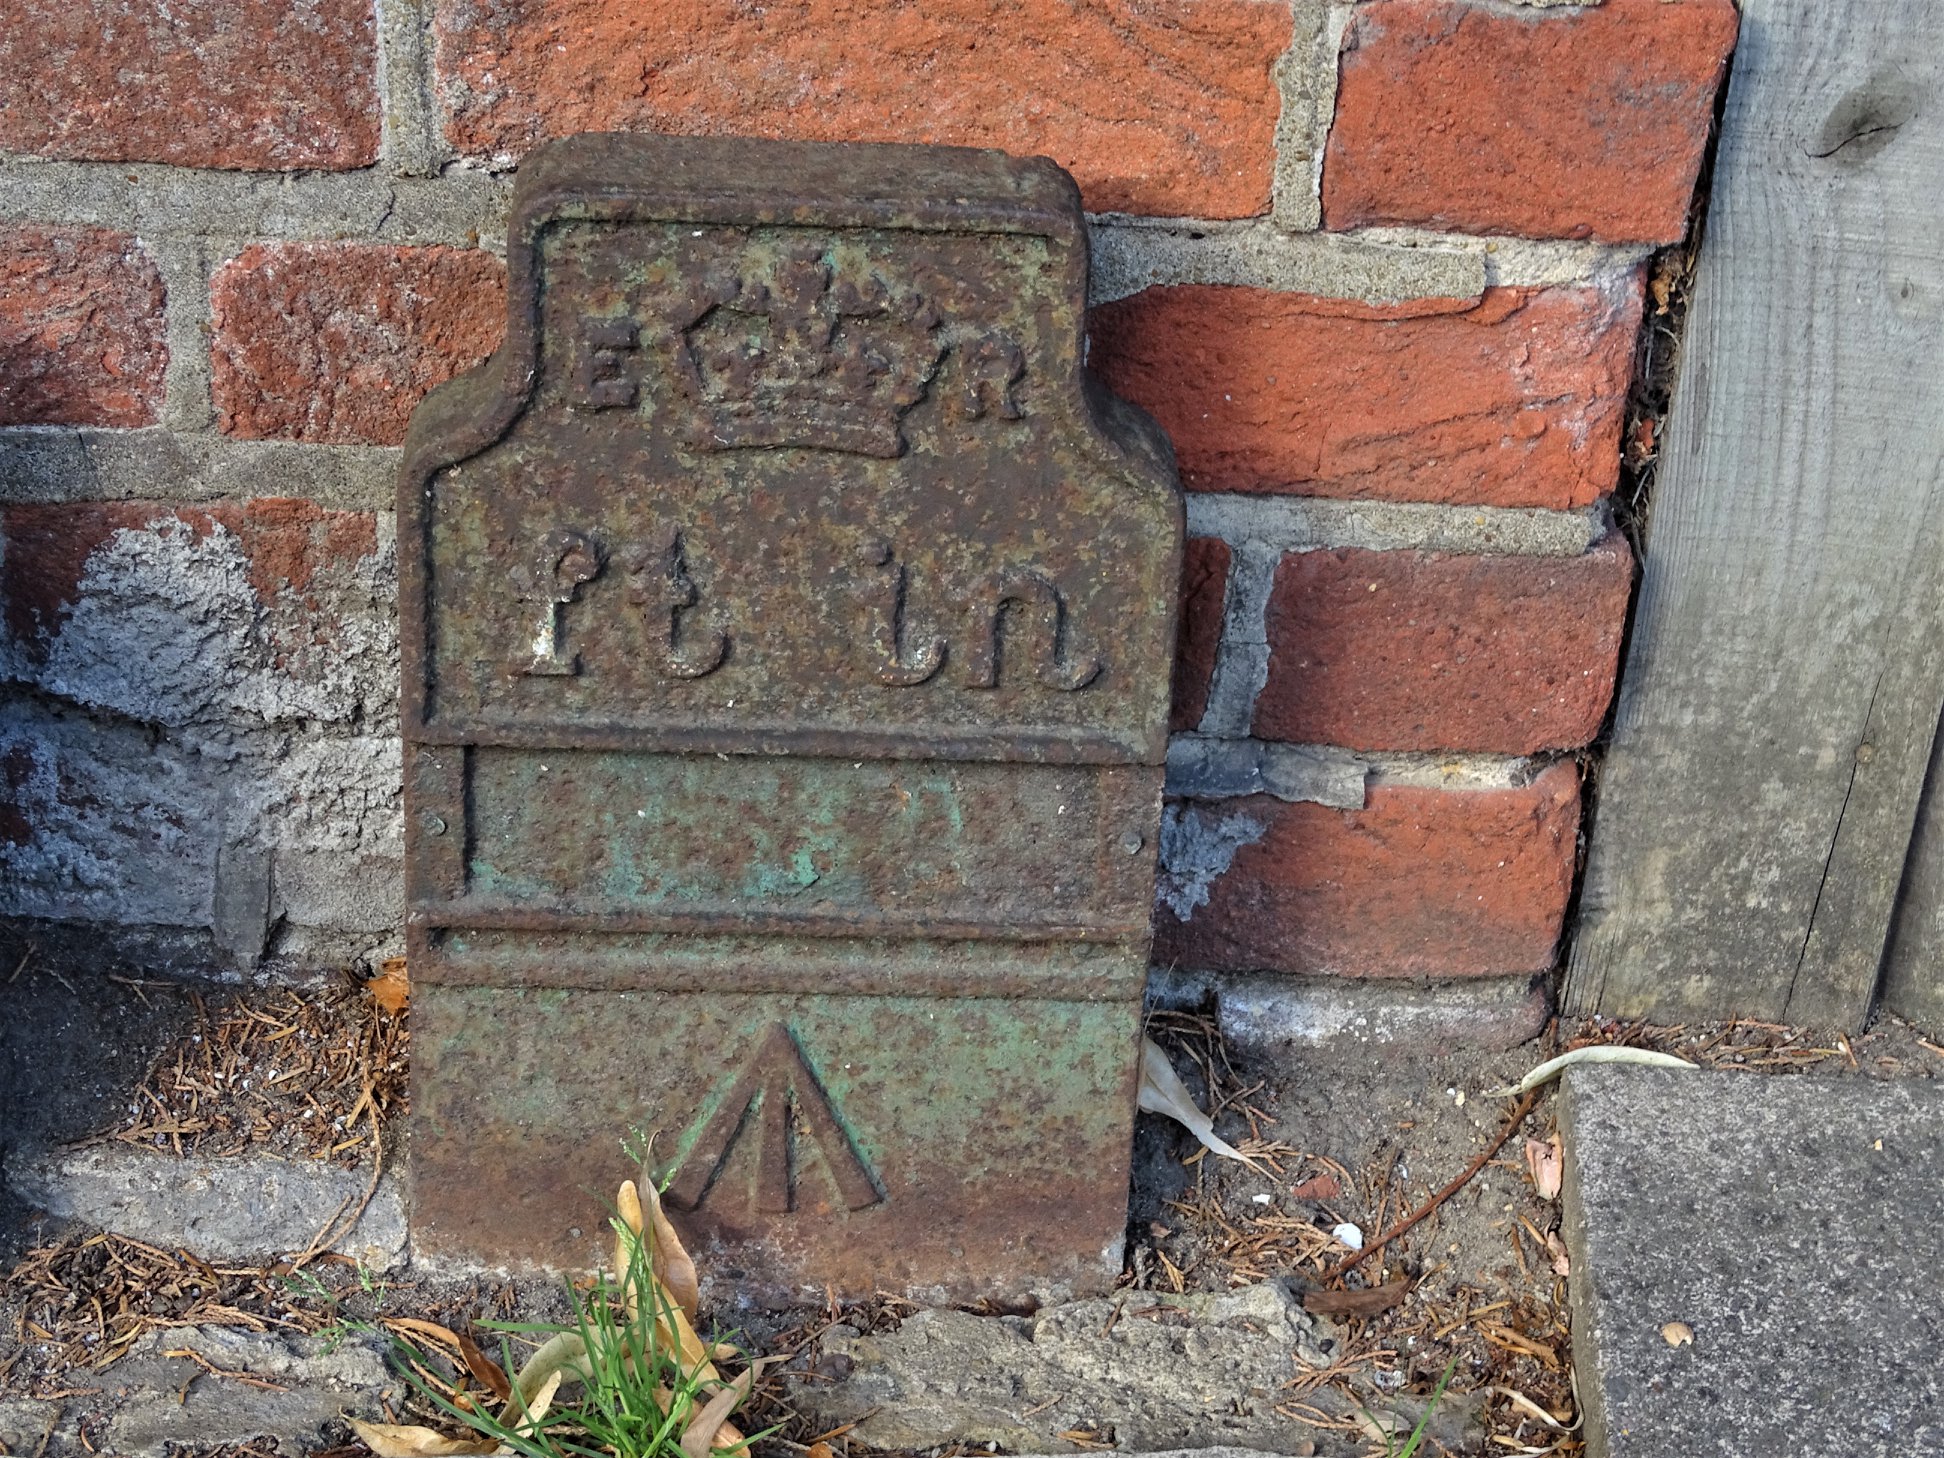 Telegraph cable marker post at 198 Hempstead Road, Watford by Stephen Danzig 